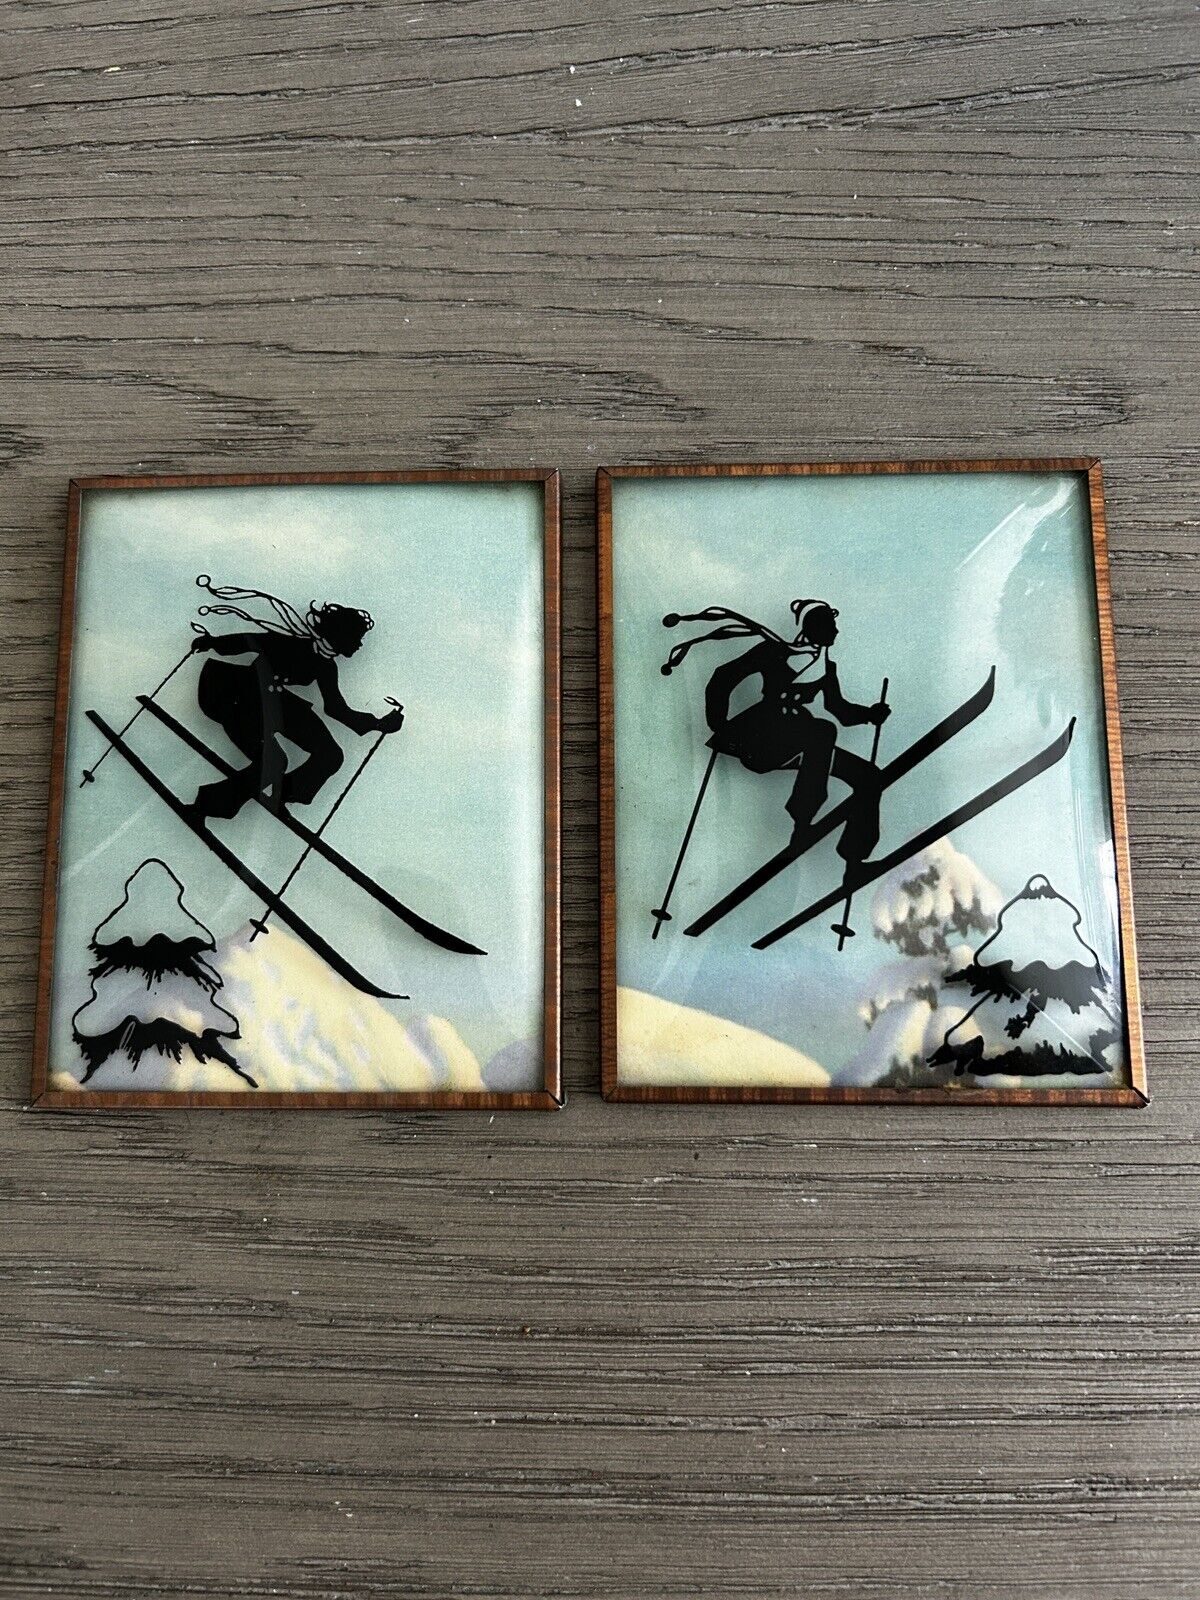 Vintage 1940s Reverse Painting on Glass - Skier - Silhouettes